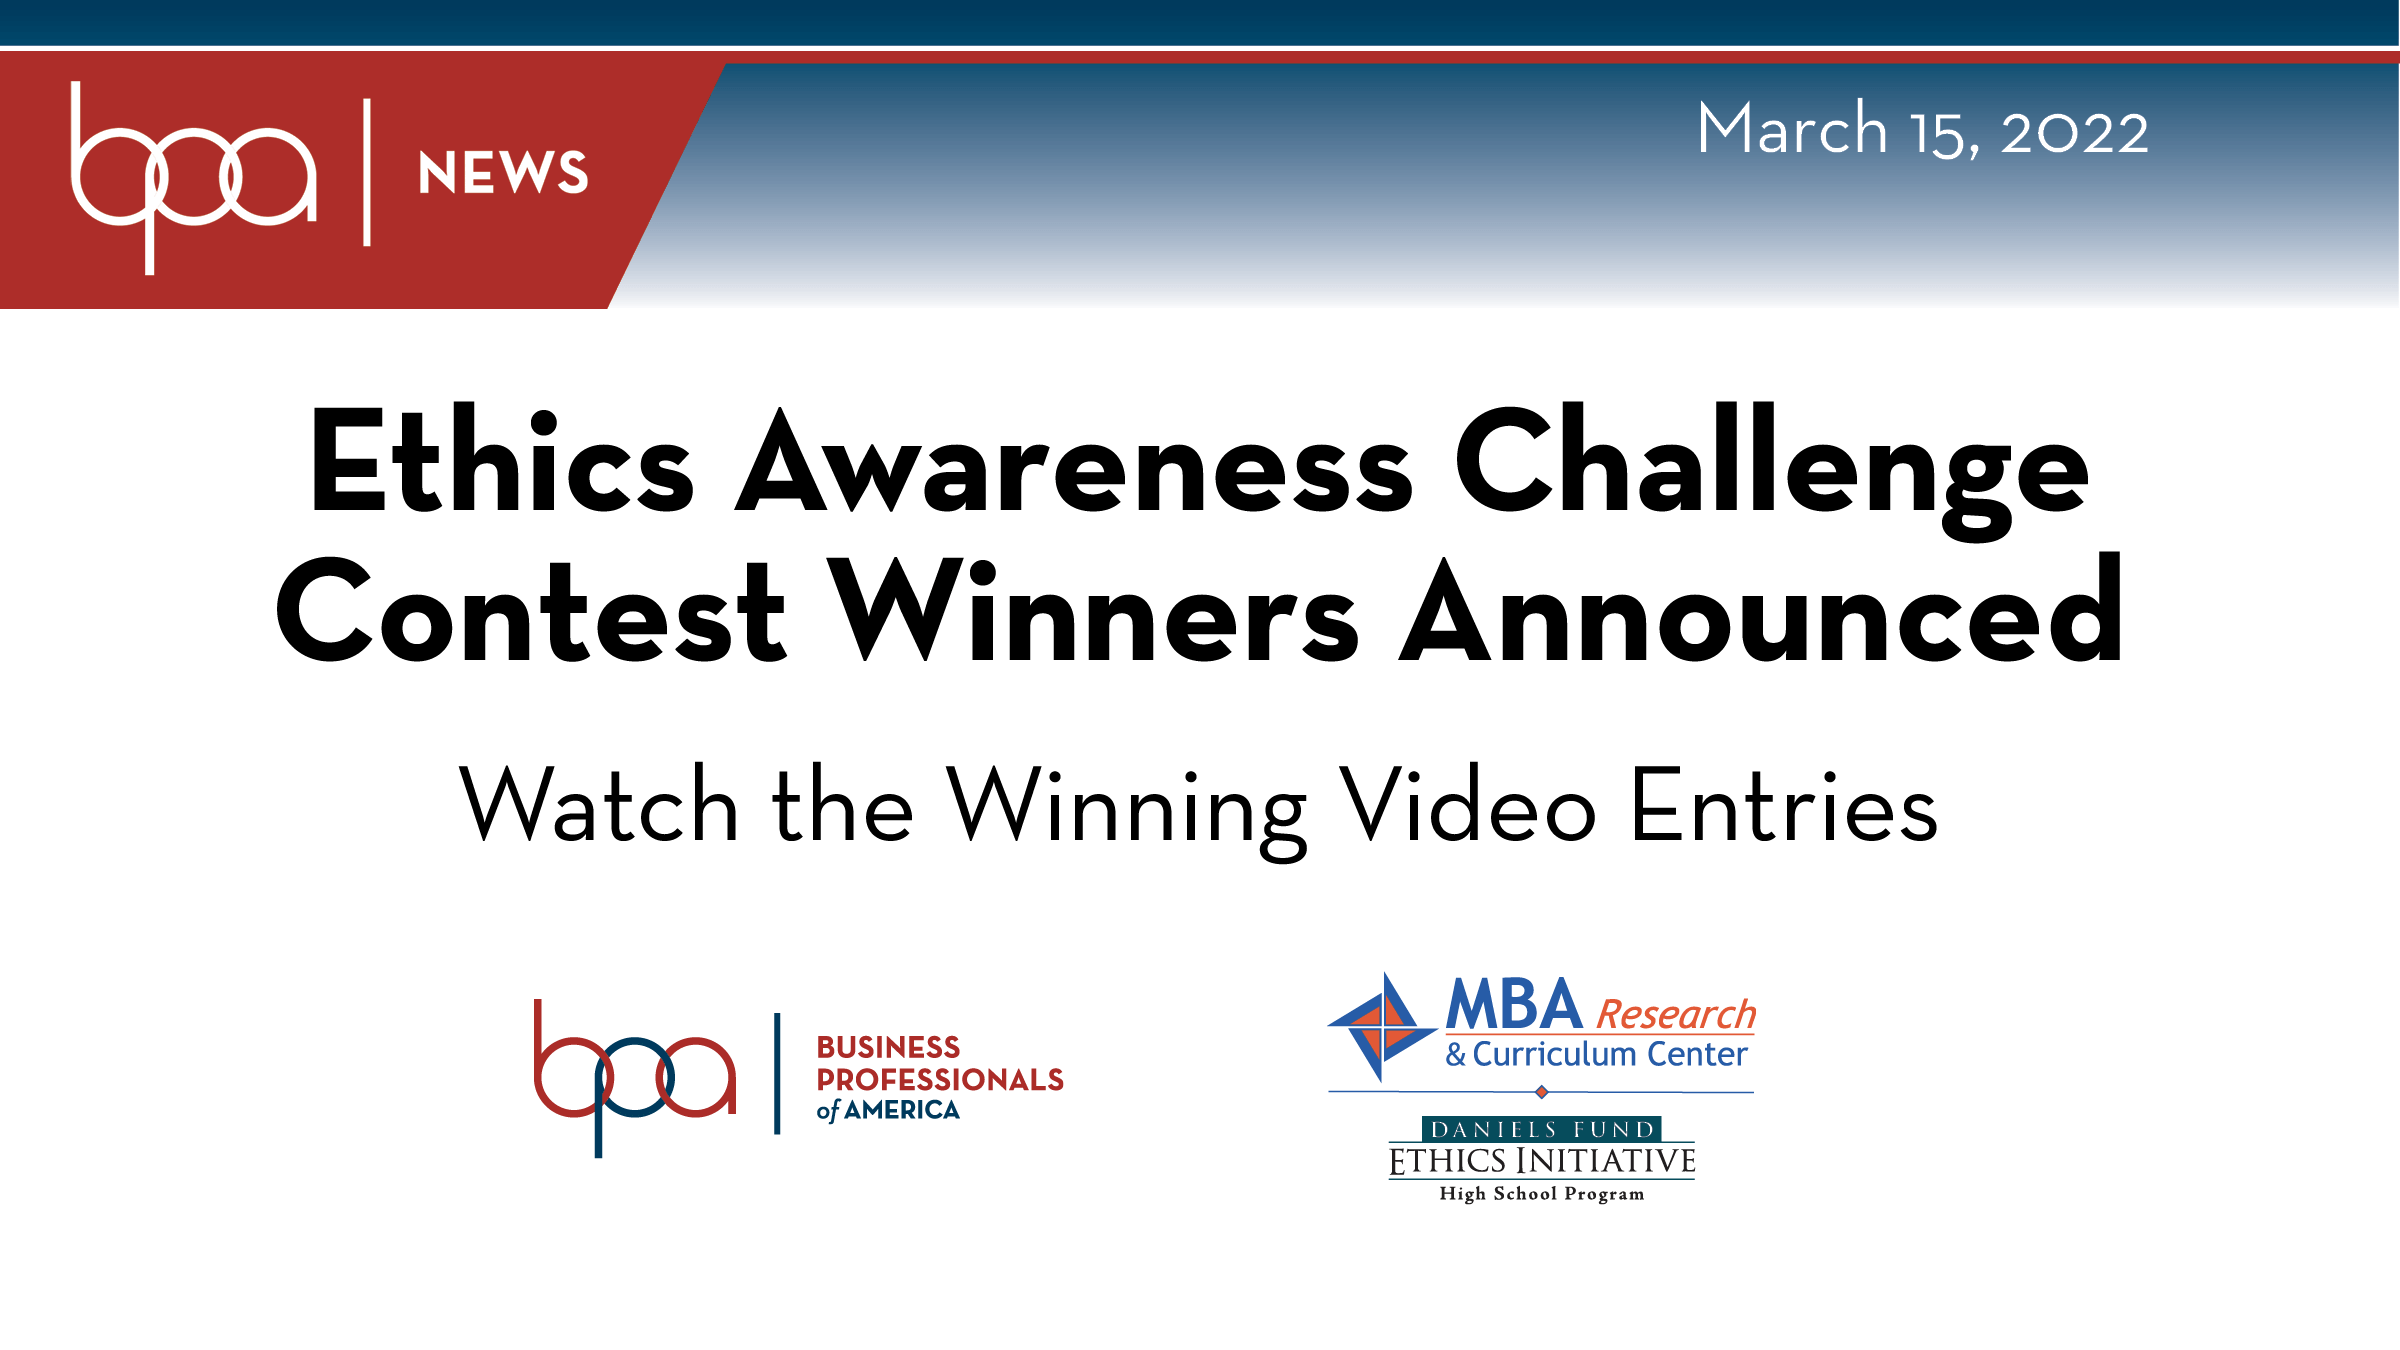 Ethics Awareness Challenge Contest Winners Announced - Watch the Winning Video Entries